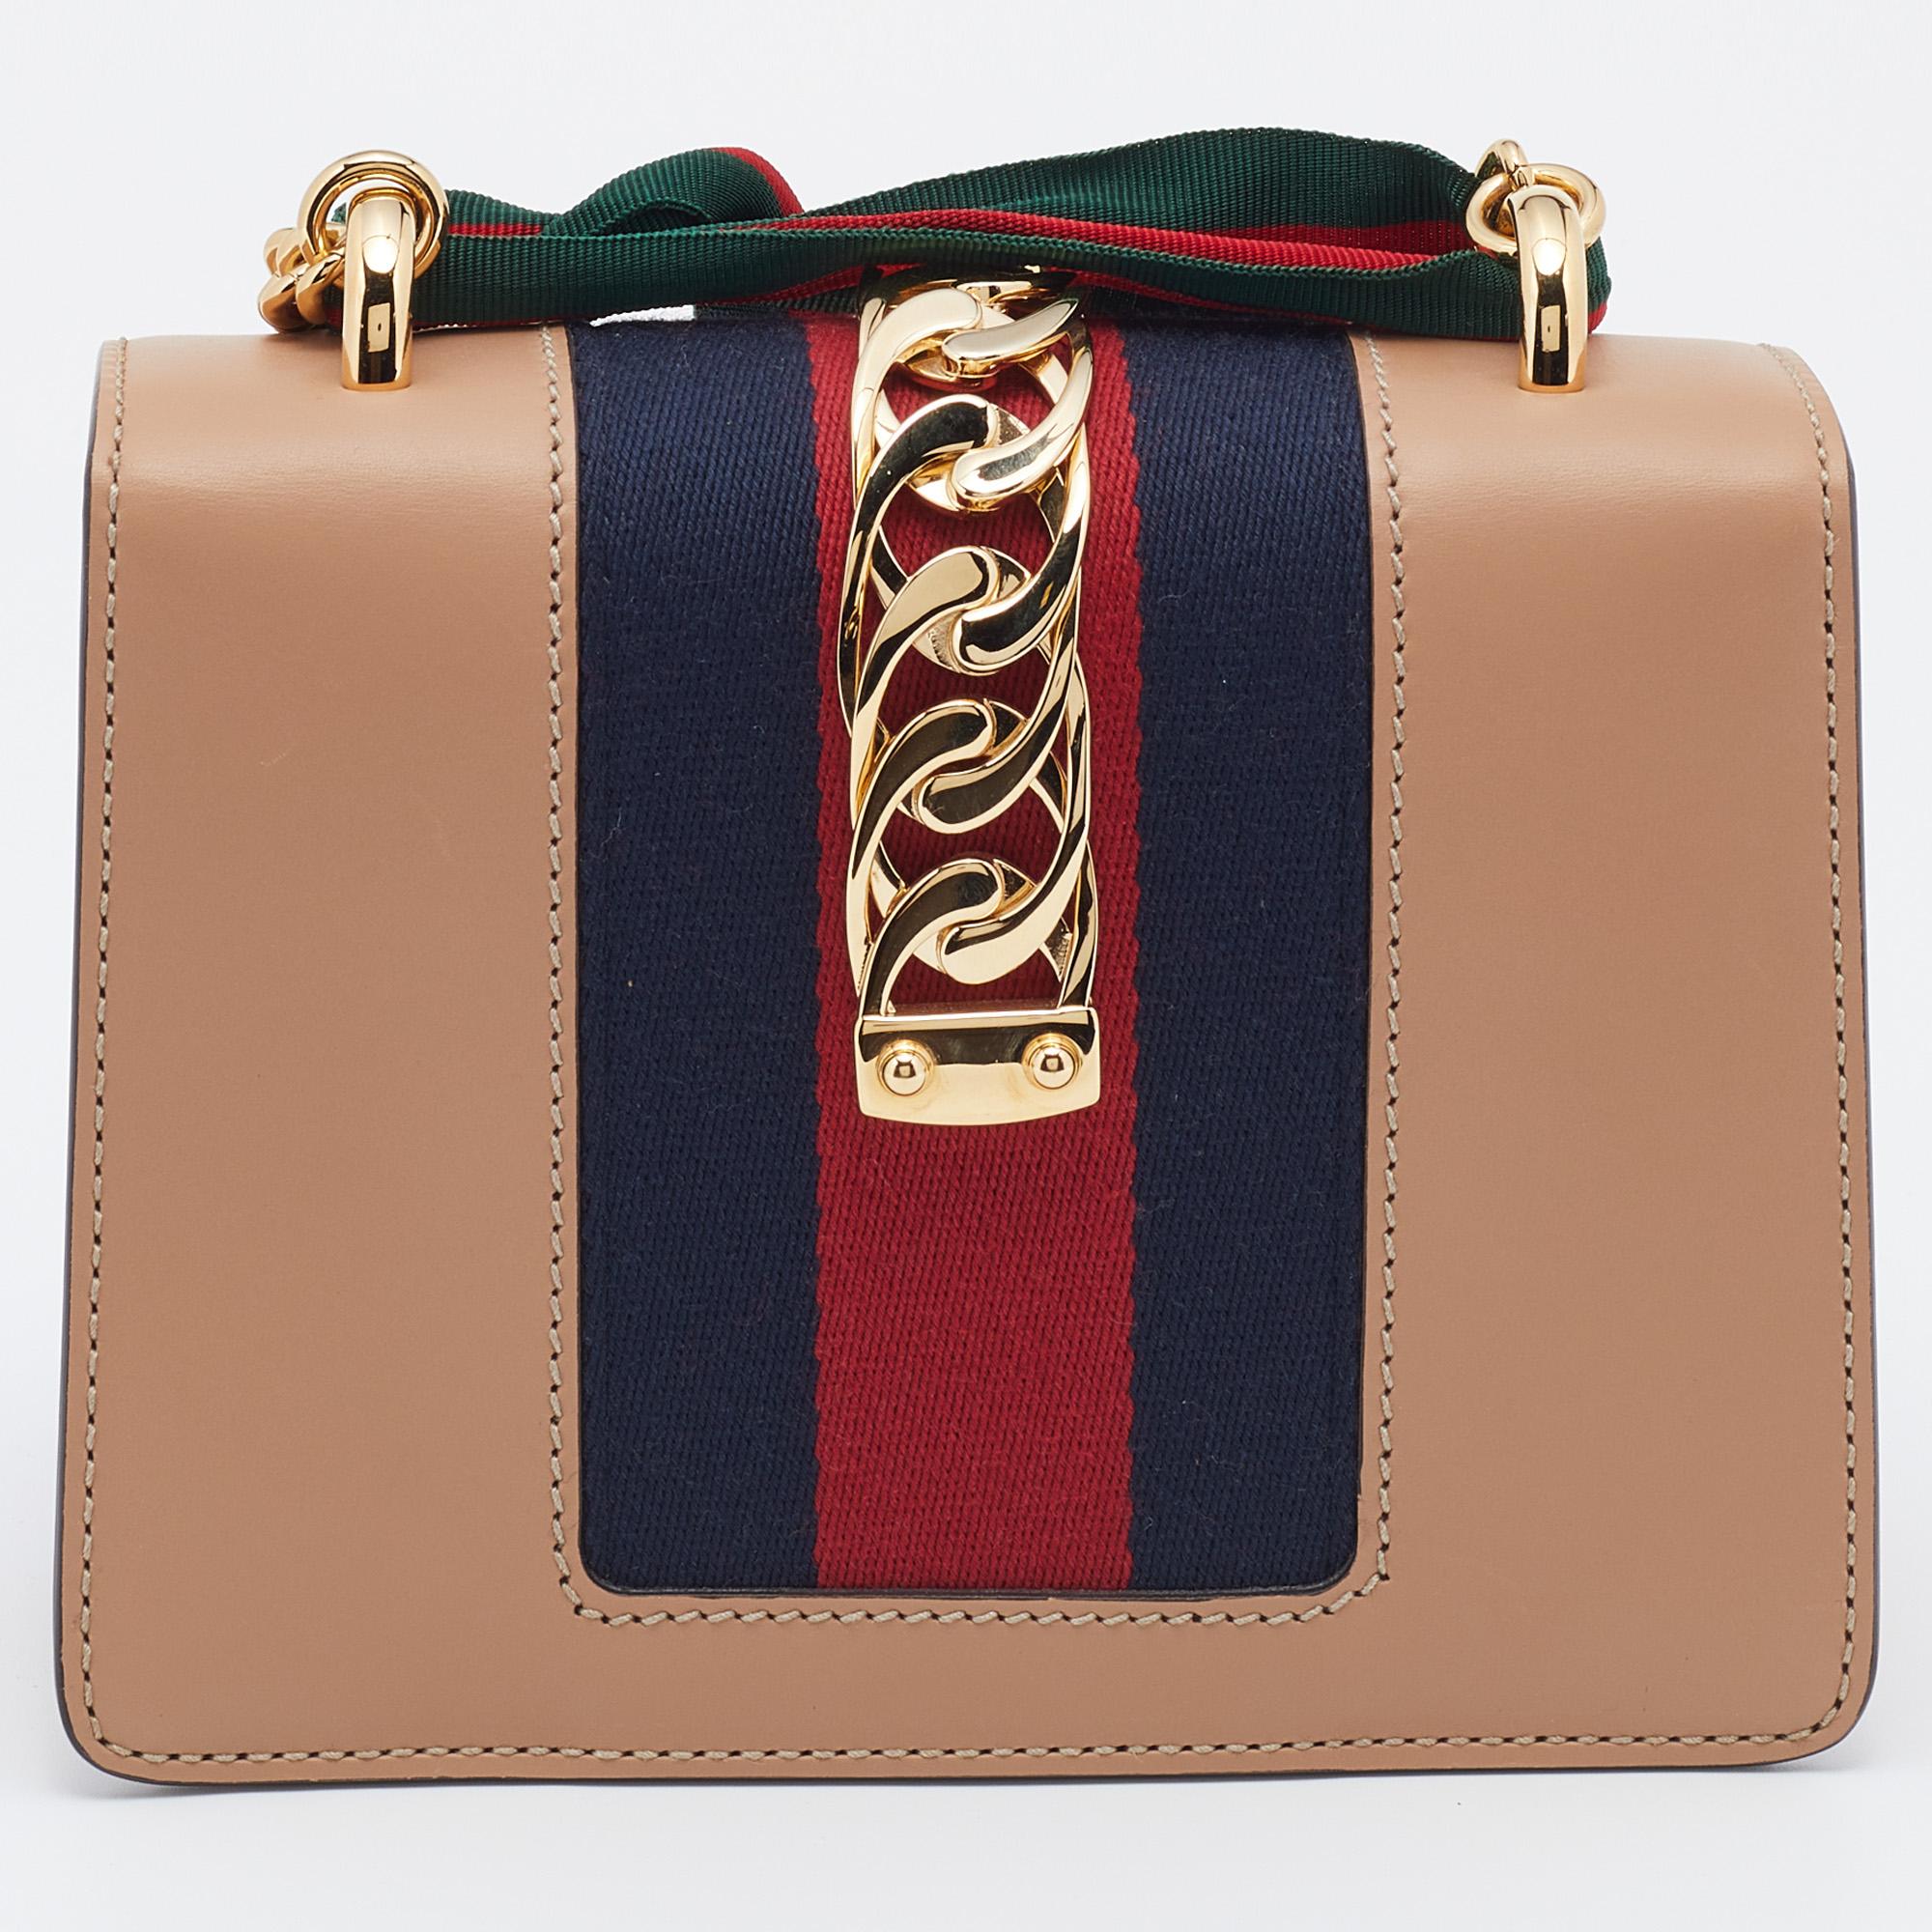 This Sylvie bag from the House of Gucci emerges as an everlasting icon of opulence and elegance with its brilliantly-designed structure. It is crafted from beige leather and it has the iconic Web strap with gold-tone chain detailing on the flap.